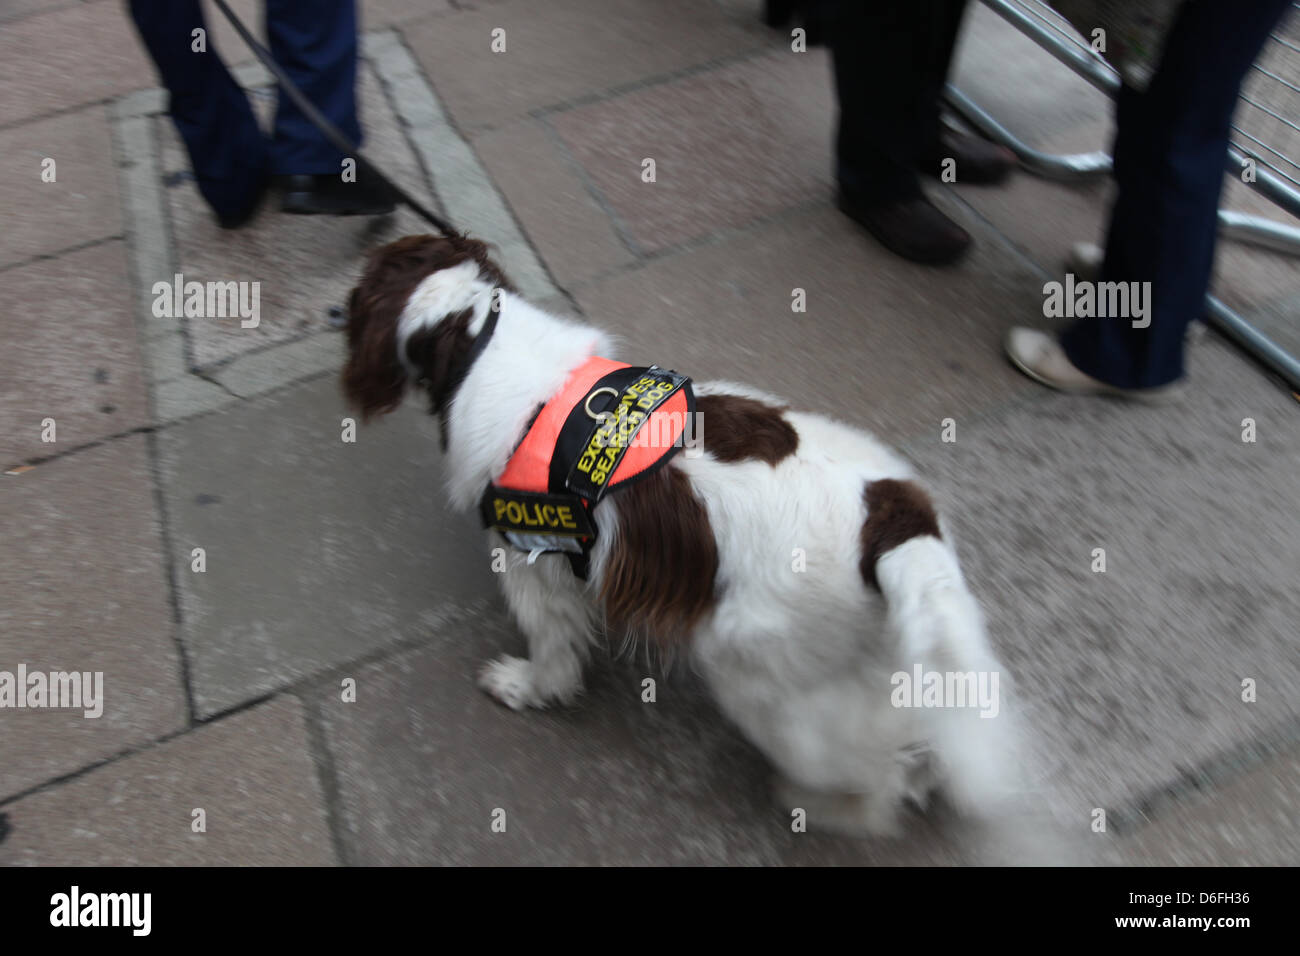 London, UK. 17th April 2013. The Funeral of Baroness Margaret Thatcher. A police explosives search dog. The Funeral service takes place in St. Paul's Cathedral, London. Pic: Paul Marriott Photography/Alamy Live News Stock Photo